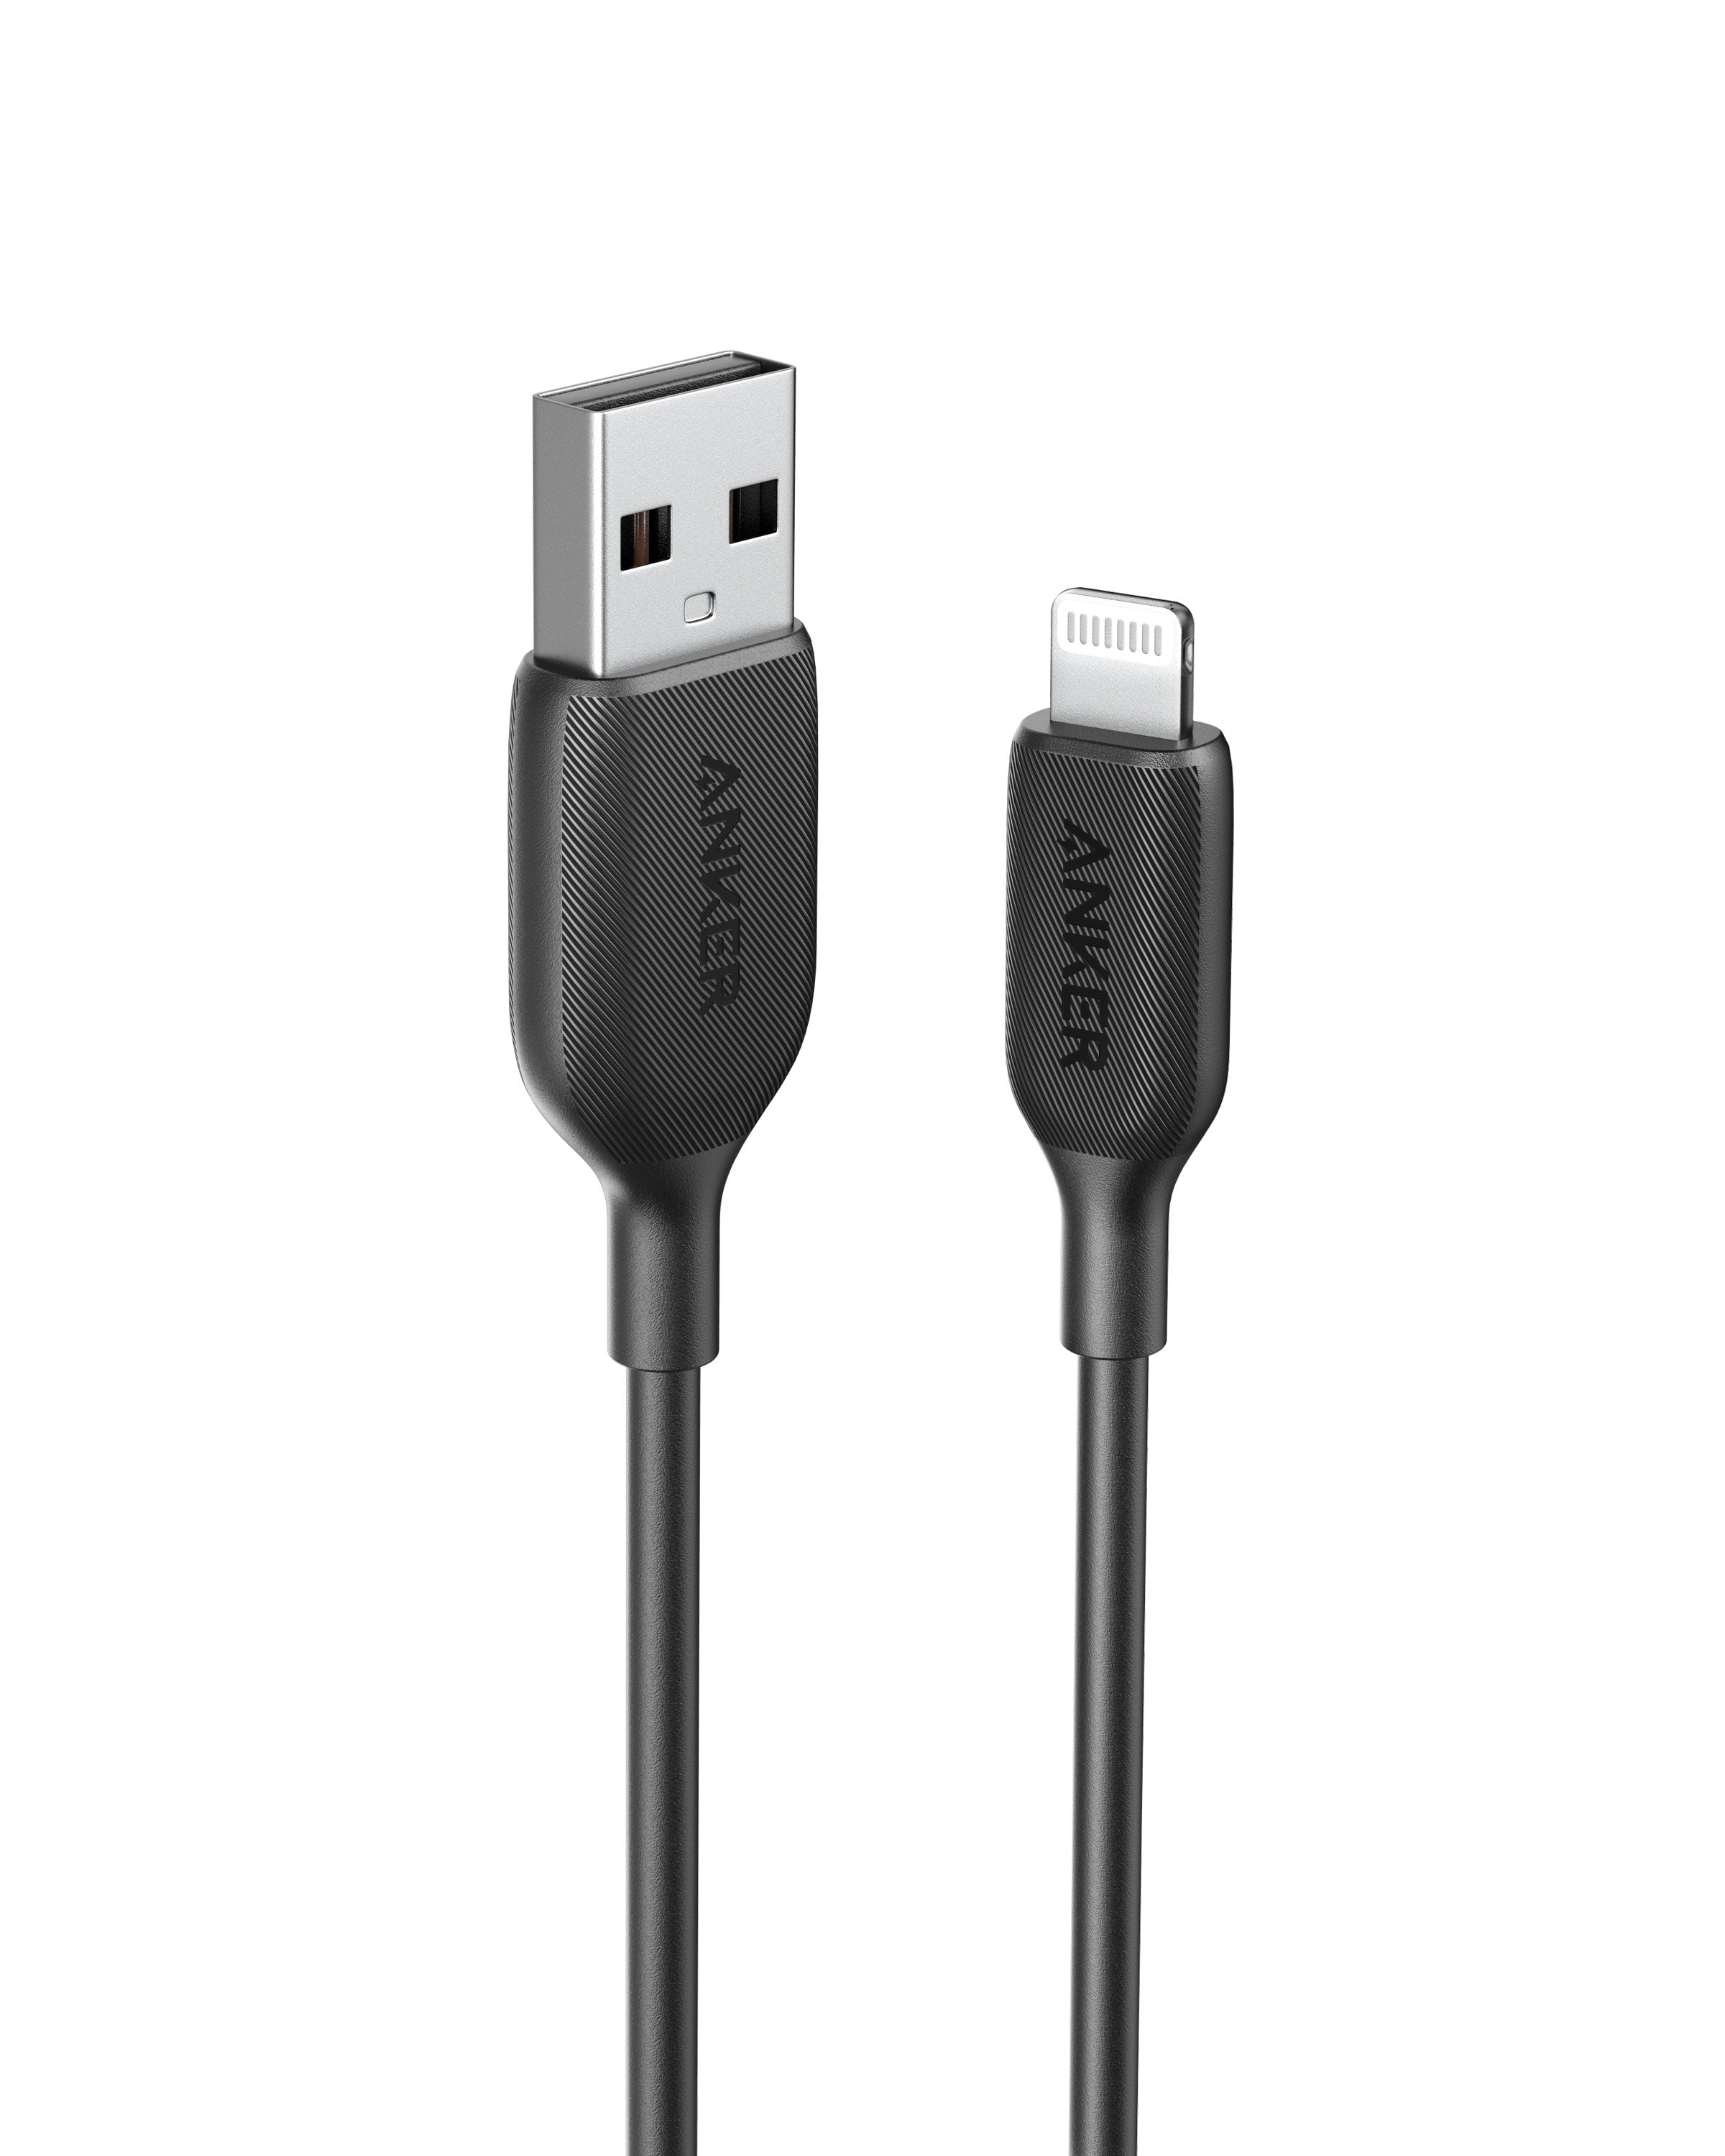 Anker USB C to Lightning Cable, iPhone 11 Charger [3ft Apple MFi